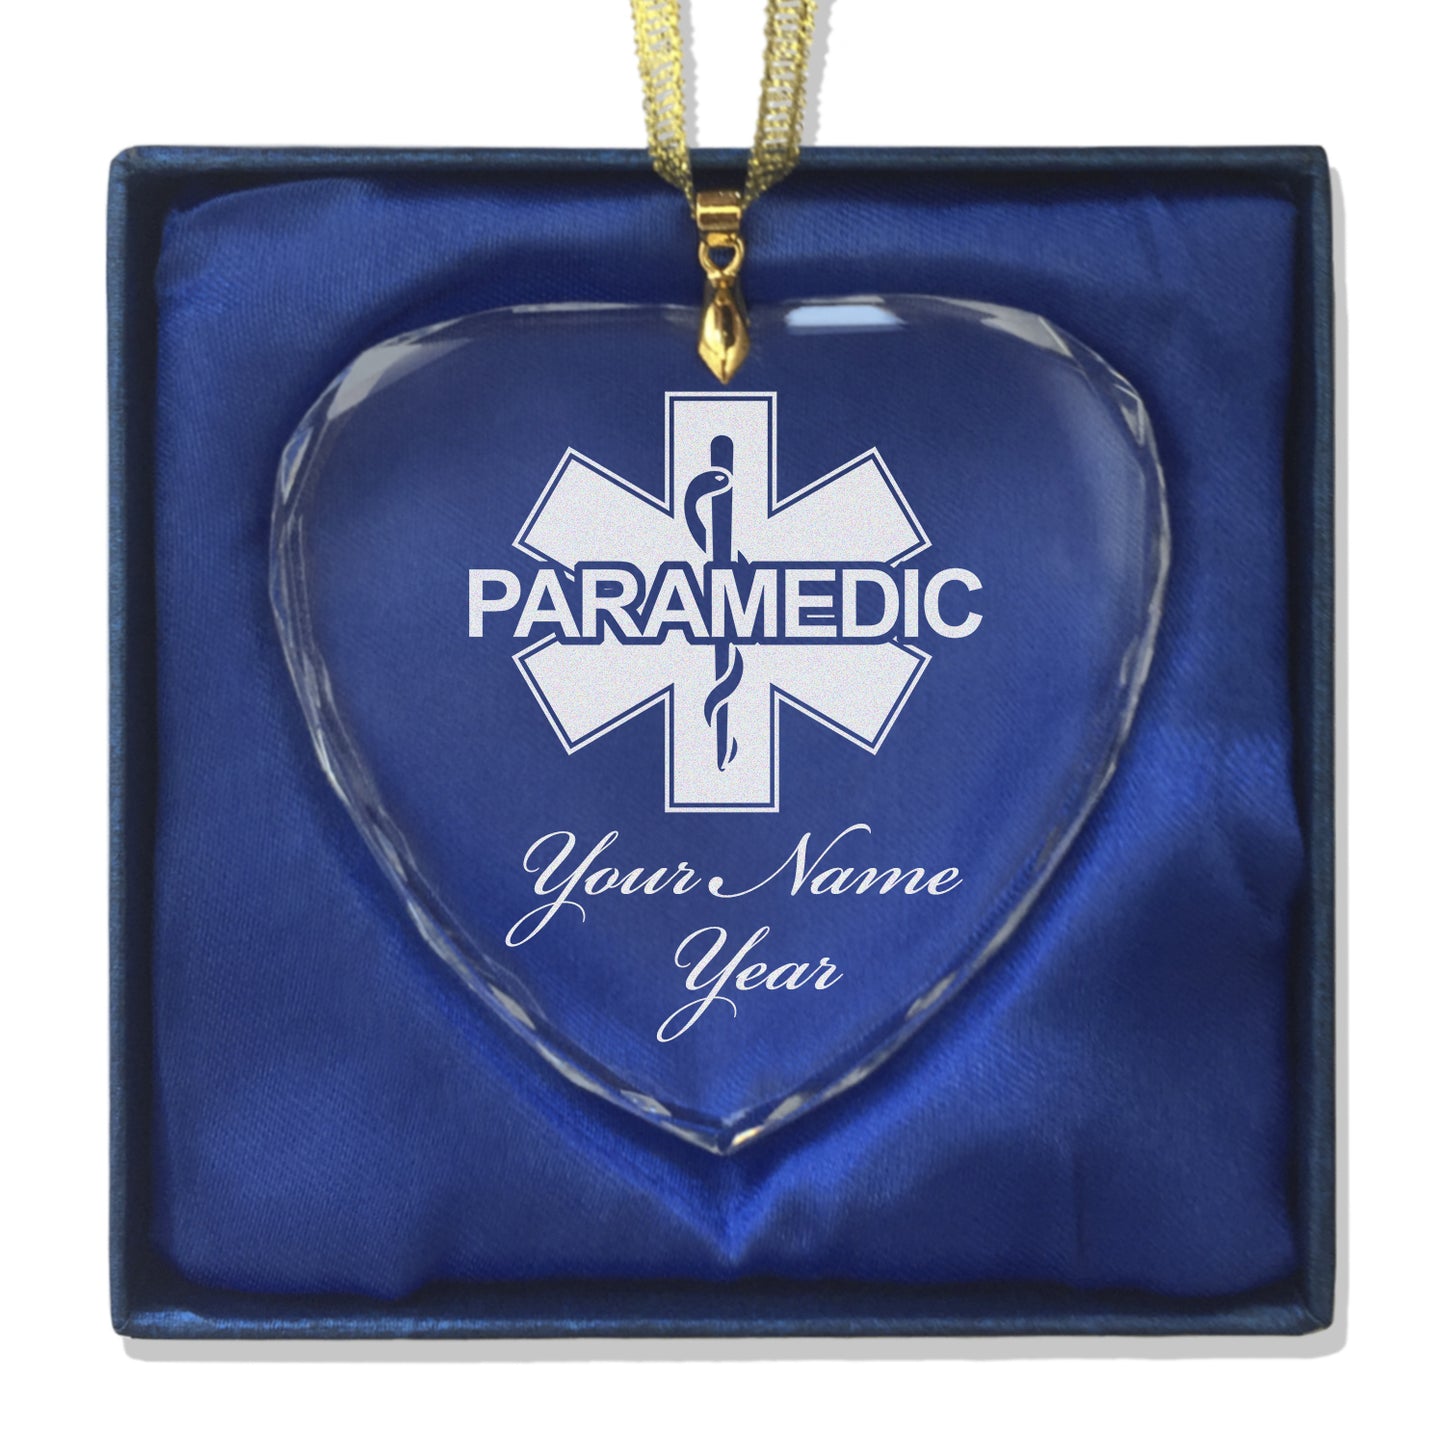 LaserGram Christmas Ornament, Paramedic, Personalized Engraving Included (Heart Shape)